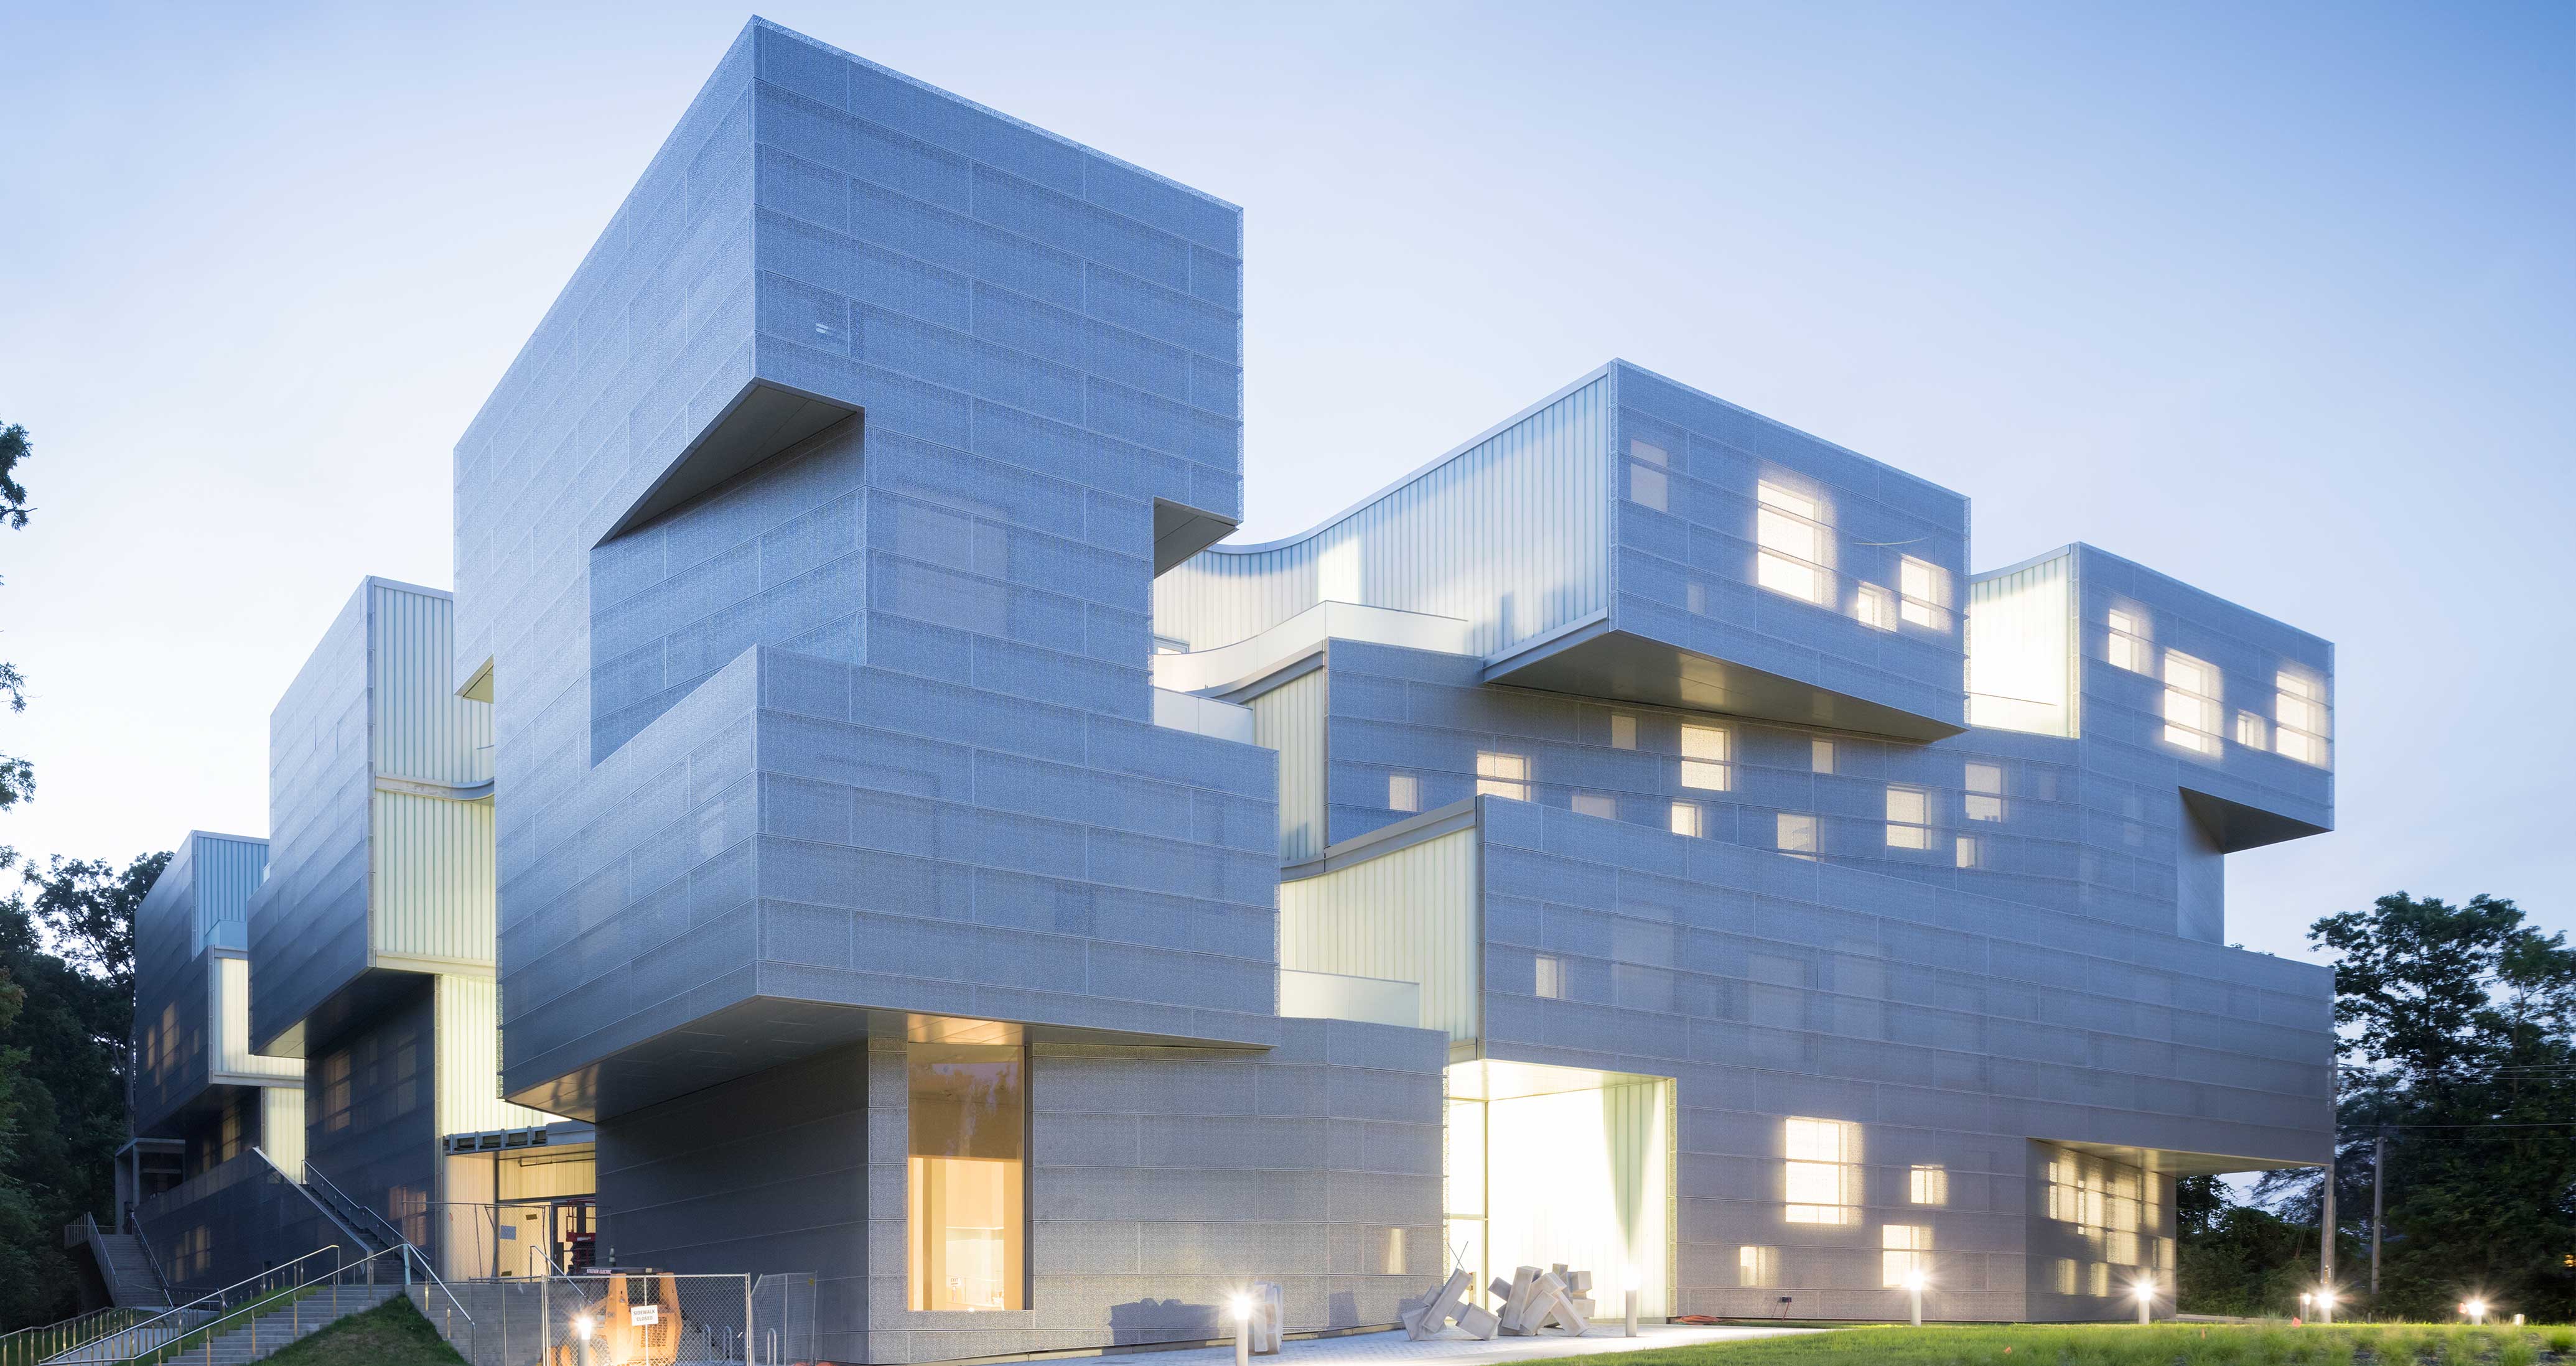 BNIM Architects Together with Steven Holl Architects Celebrate Opening of University of Iowa Visual Arts Building